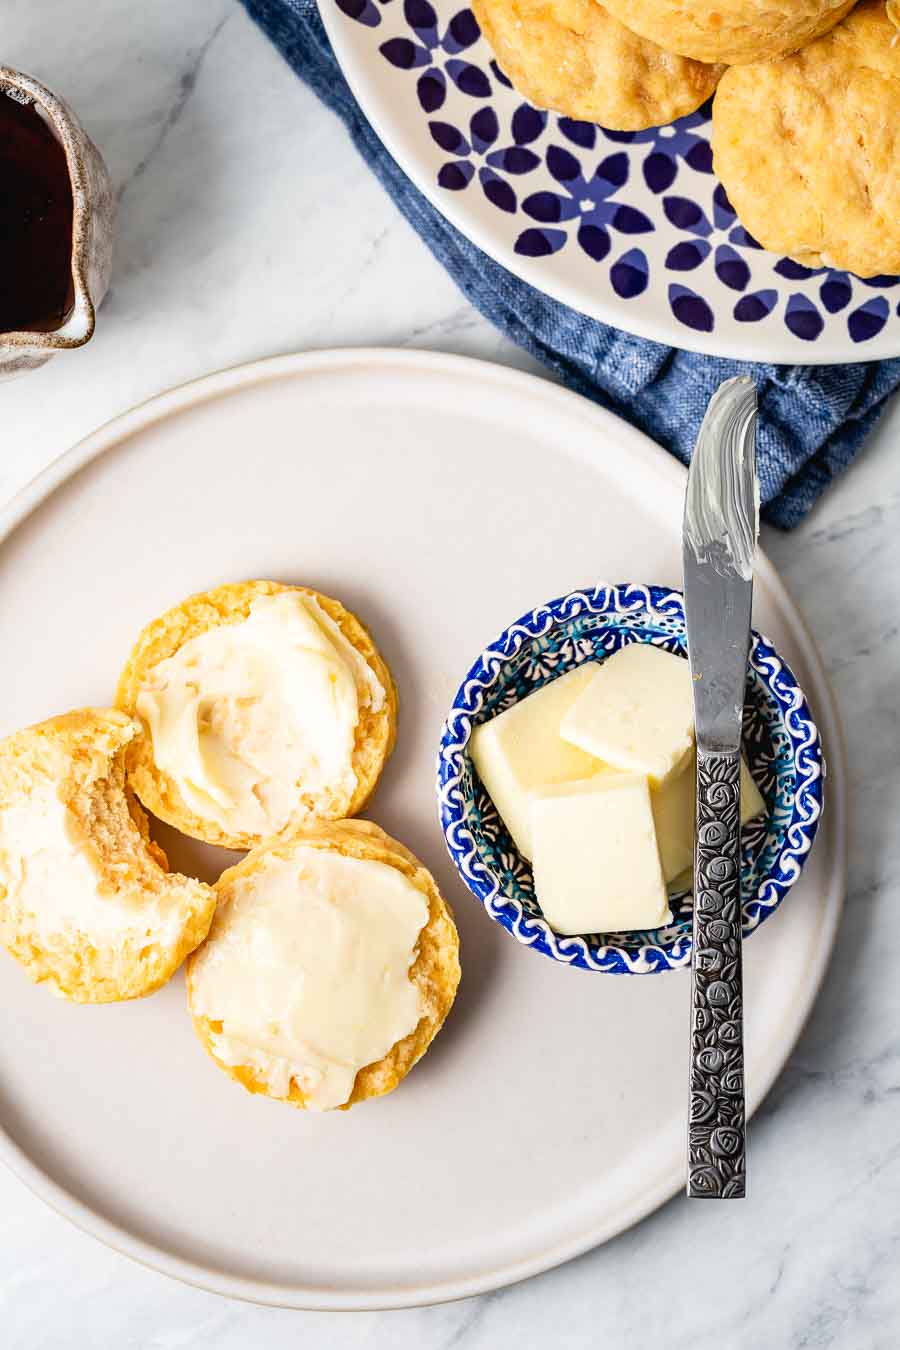 Sweet potato biscuits are spread with butter and photographed from the top view.